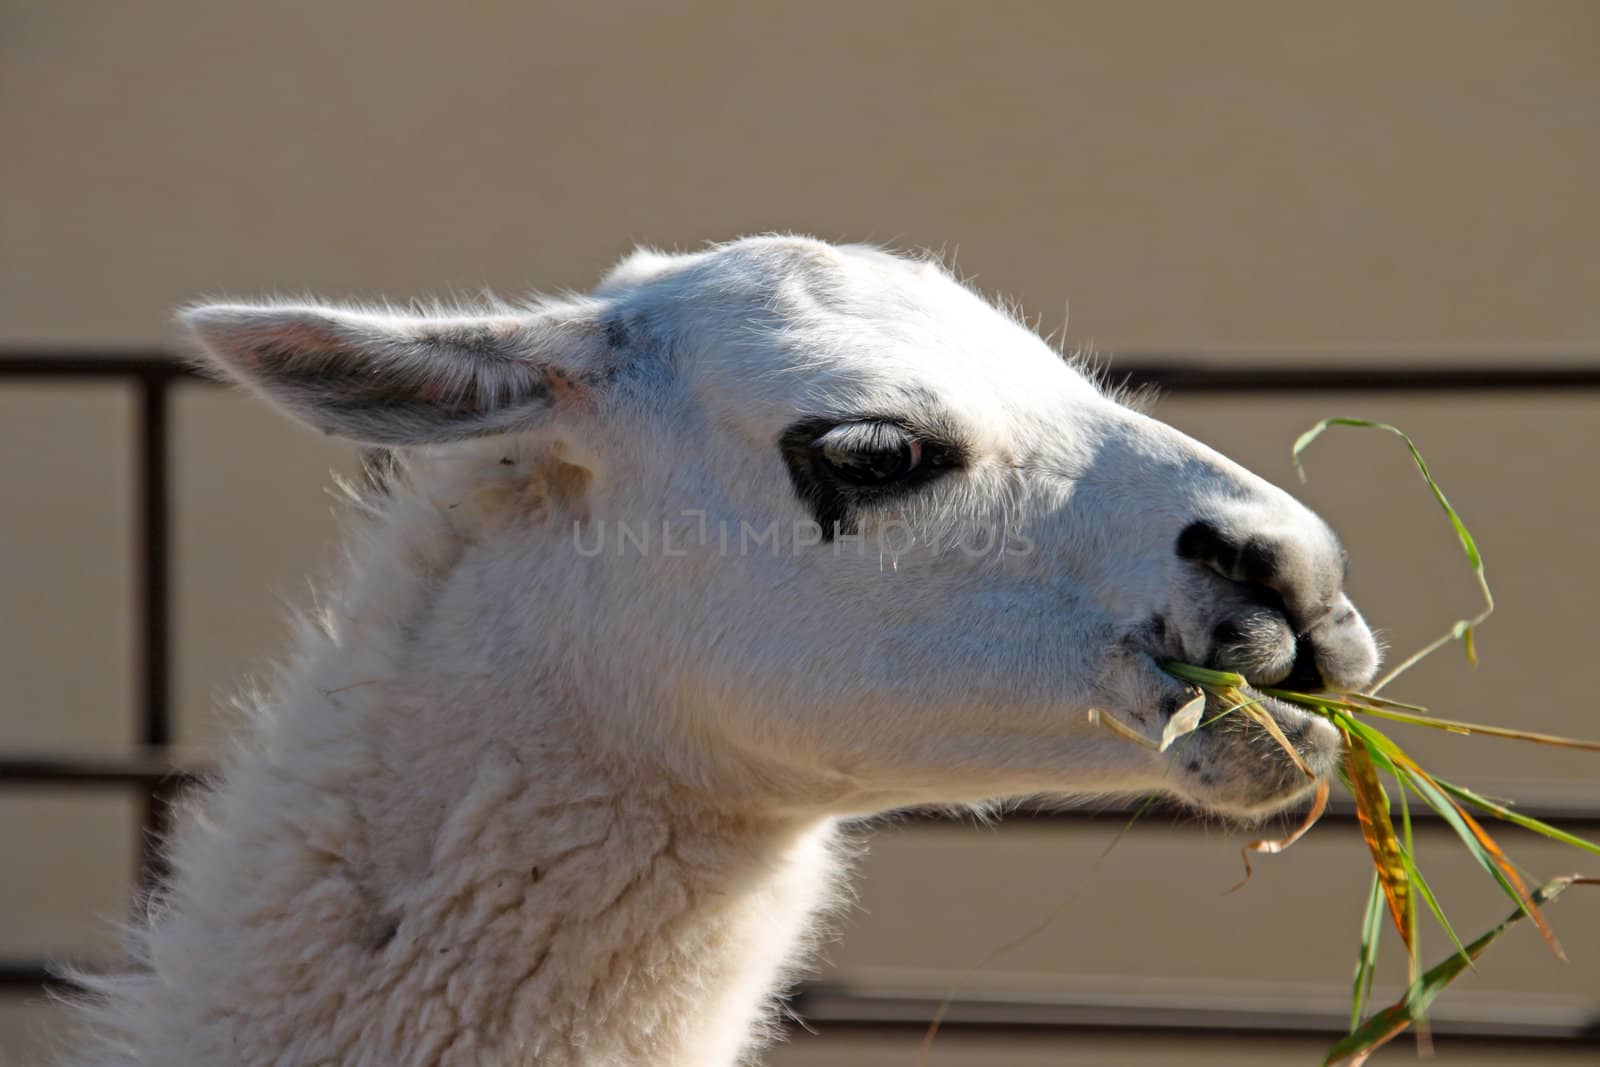 A llama is chewing on its breakfast straw